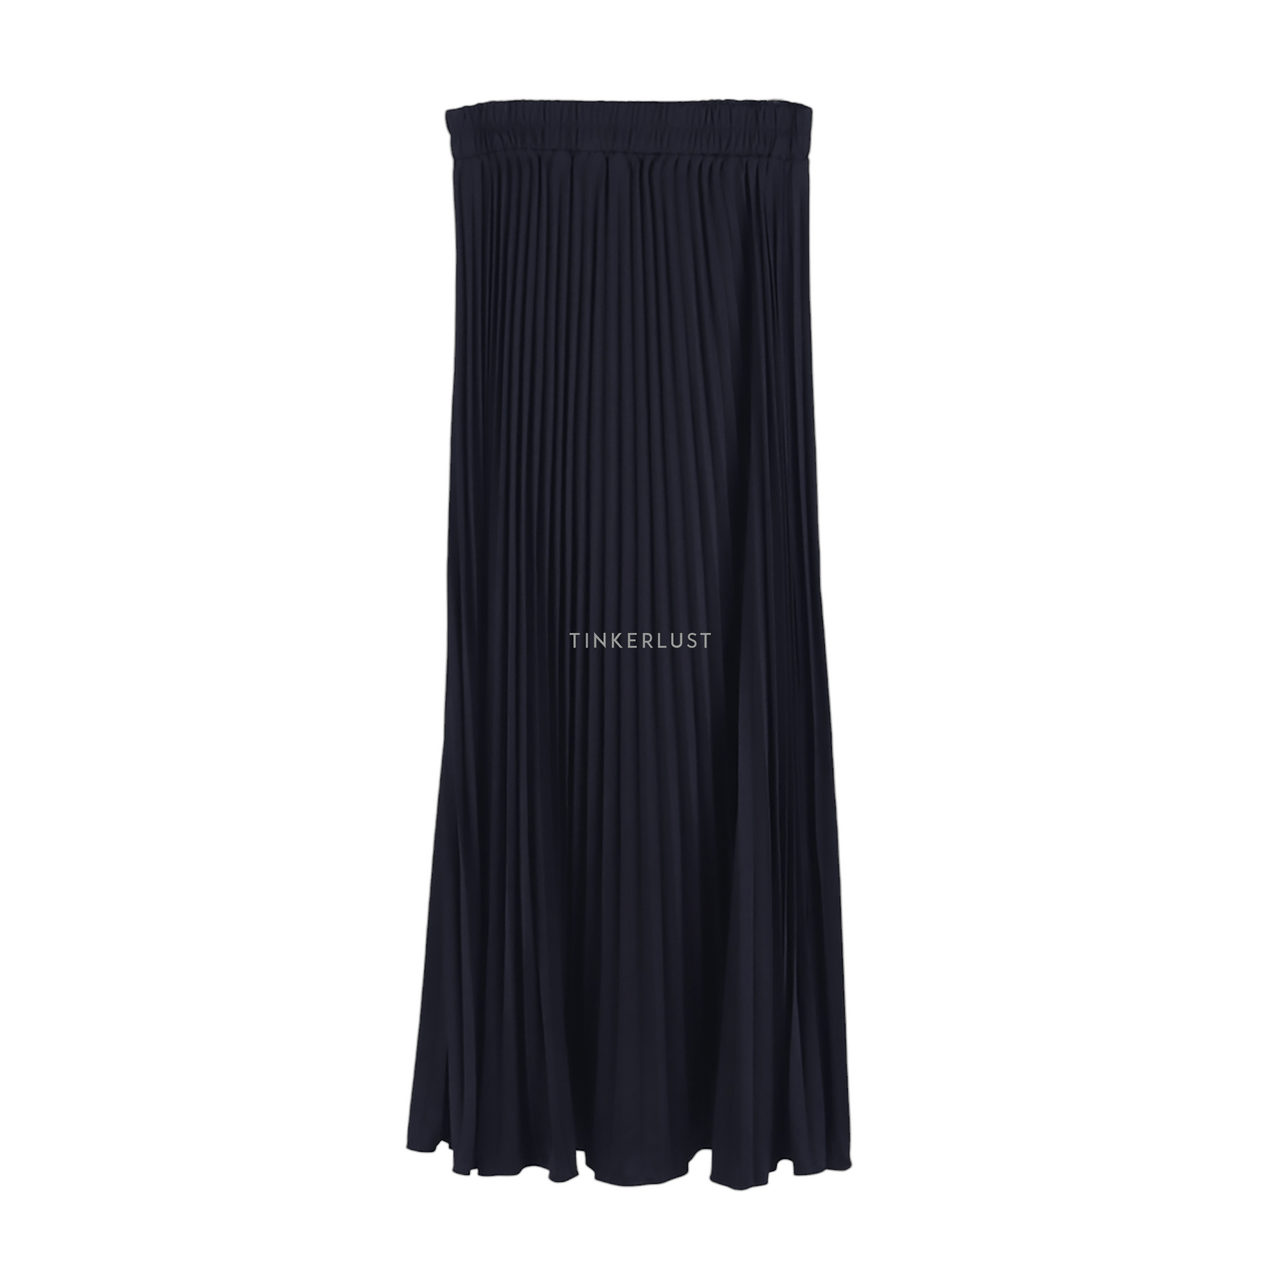 Private Collection Black Pleated Midi Skirt